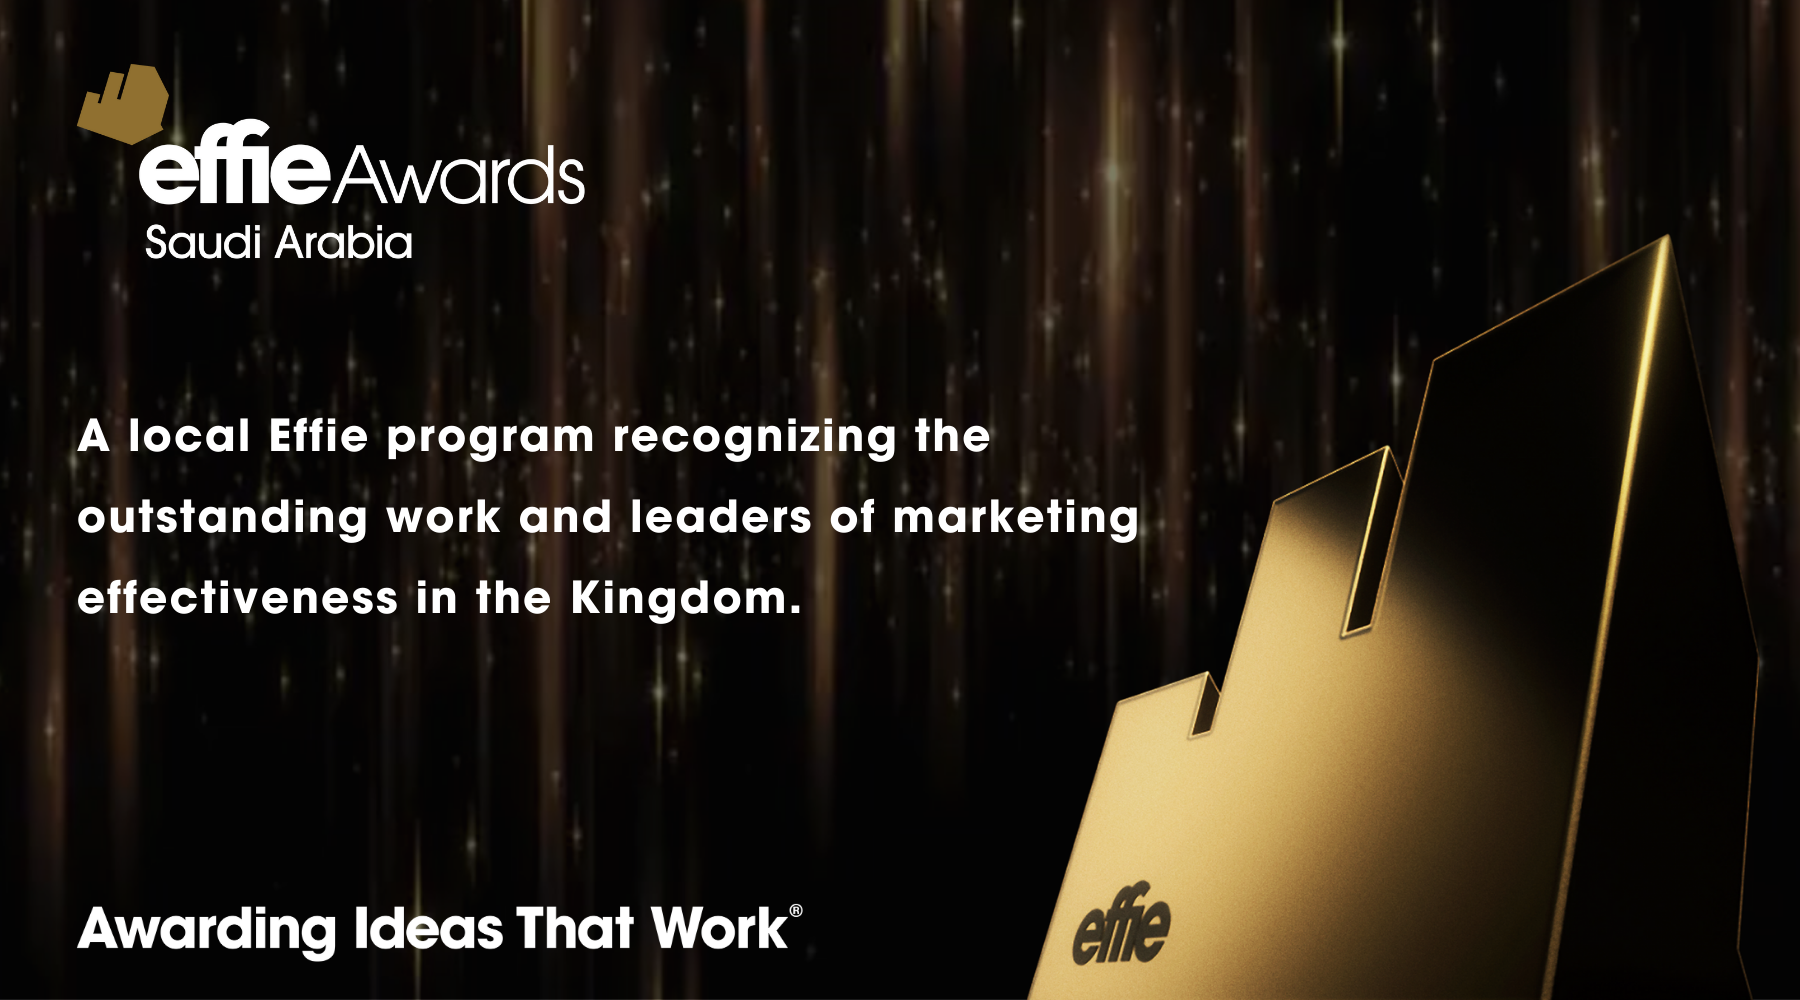 Marketing Effectiveness to be Redefined in KSA with Effie Awards Saudi Arabia